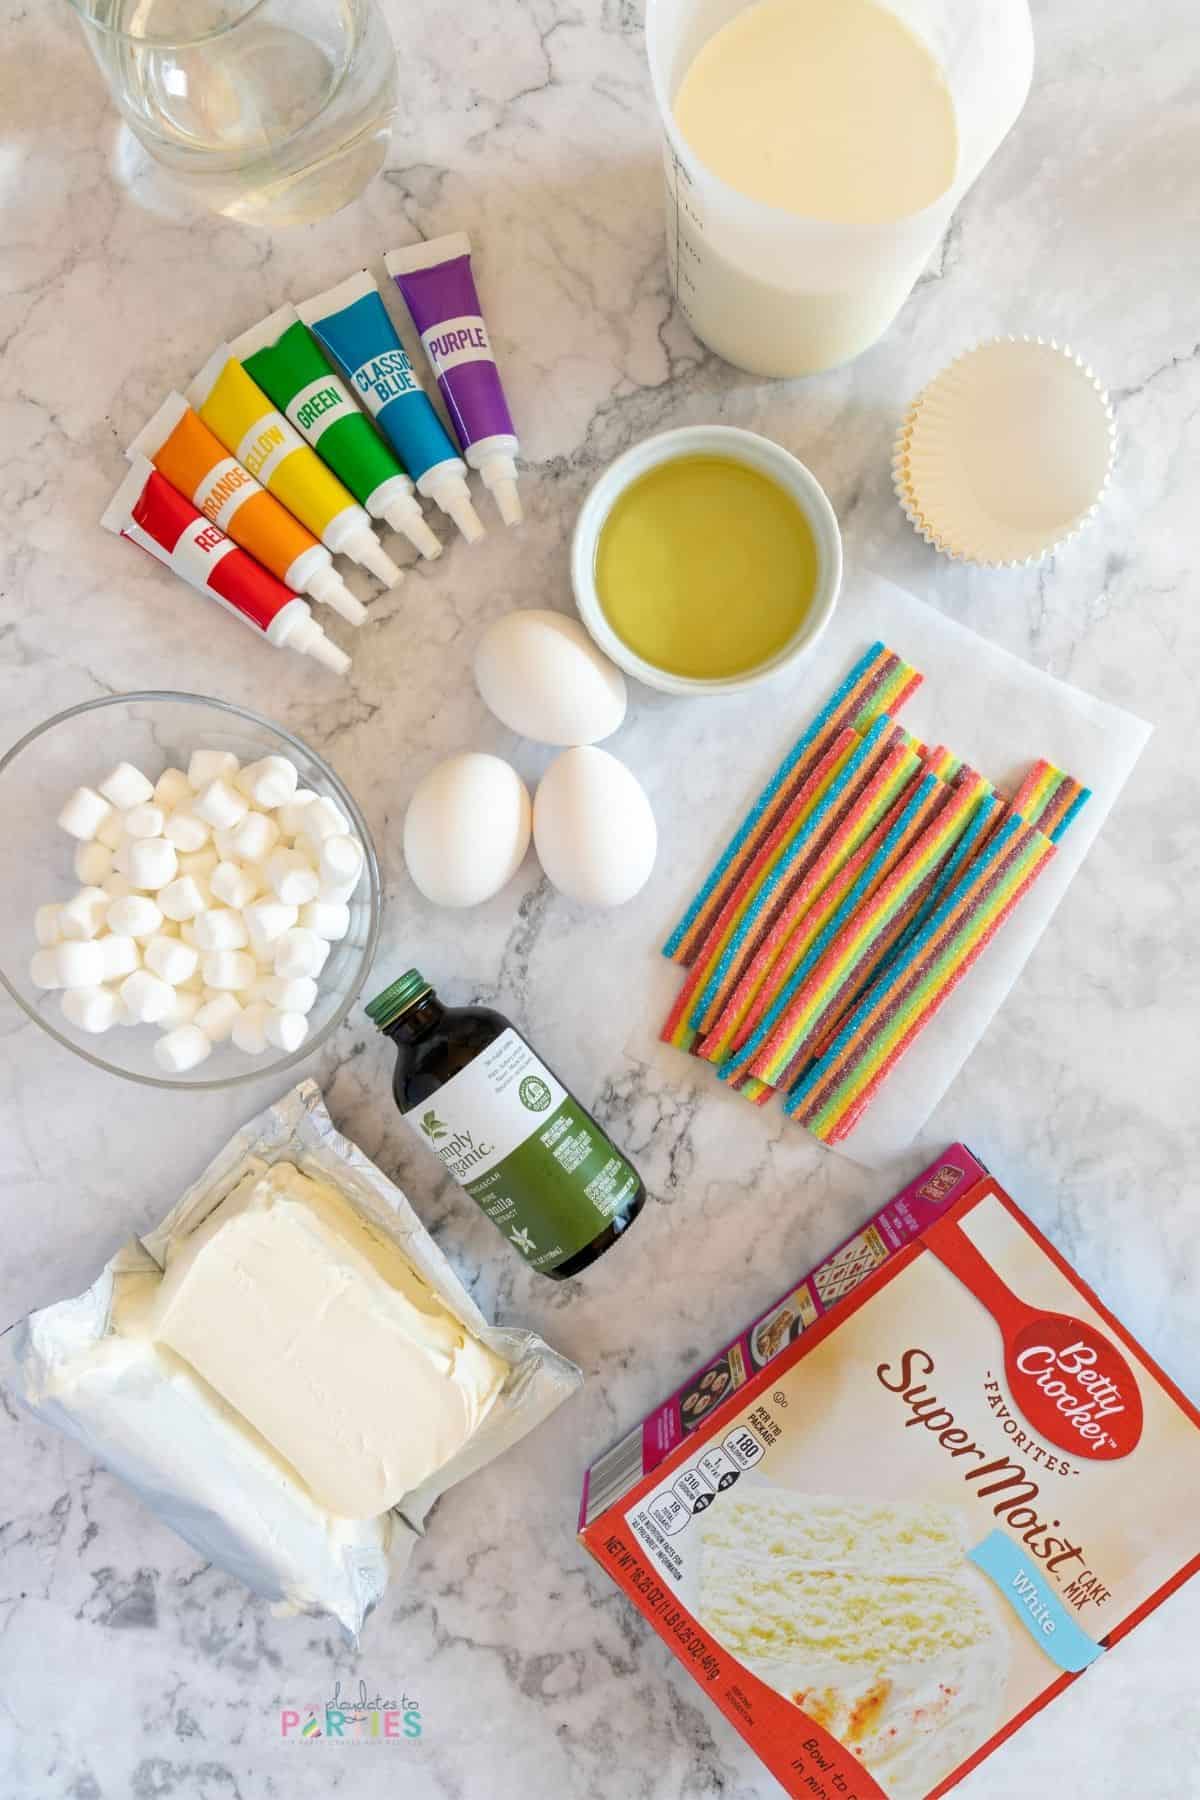 Ingredients for rainbow cupcakes.